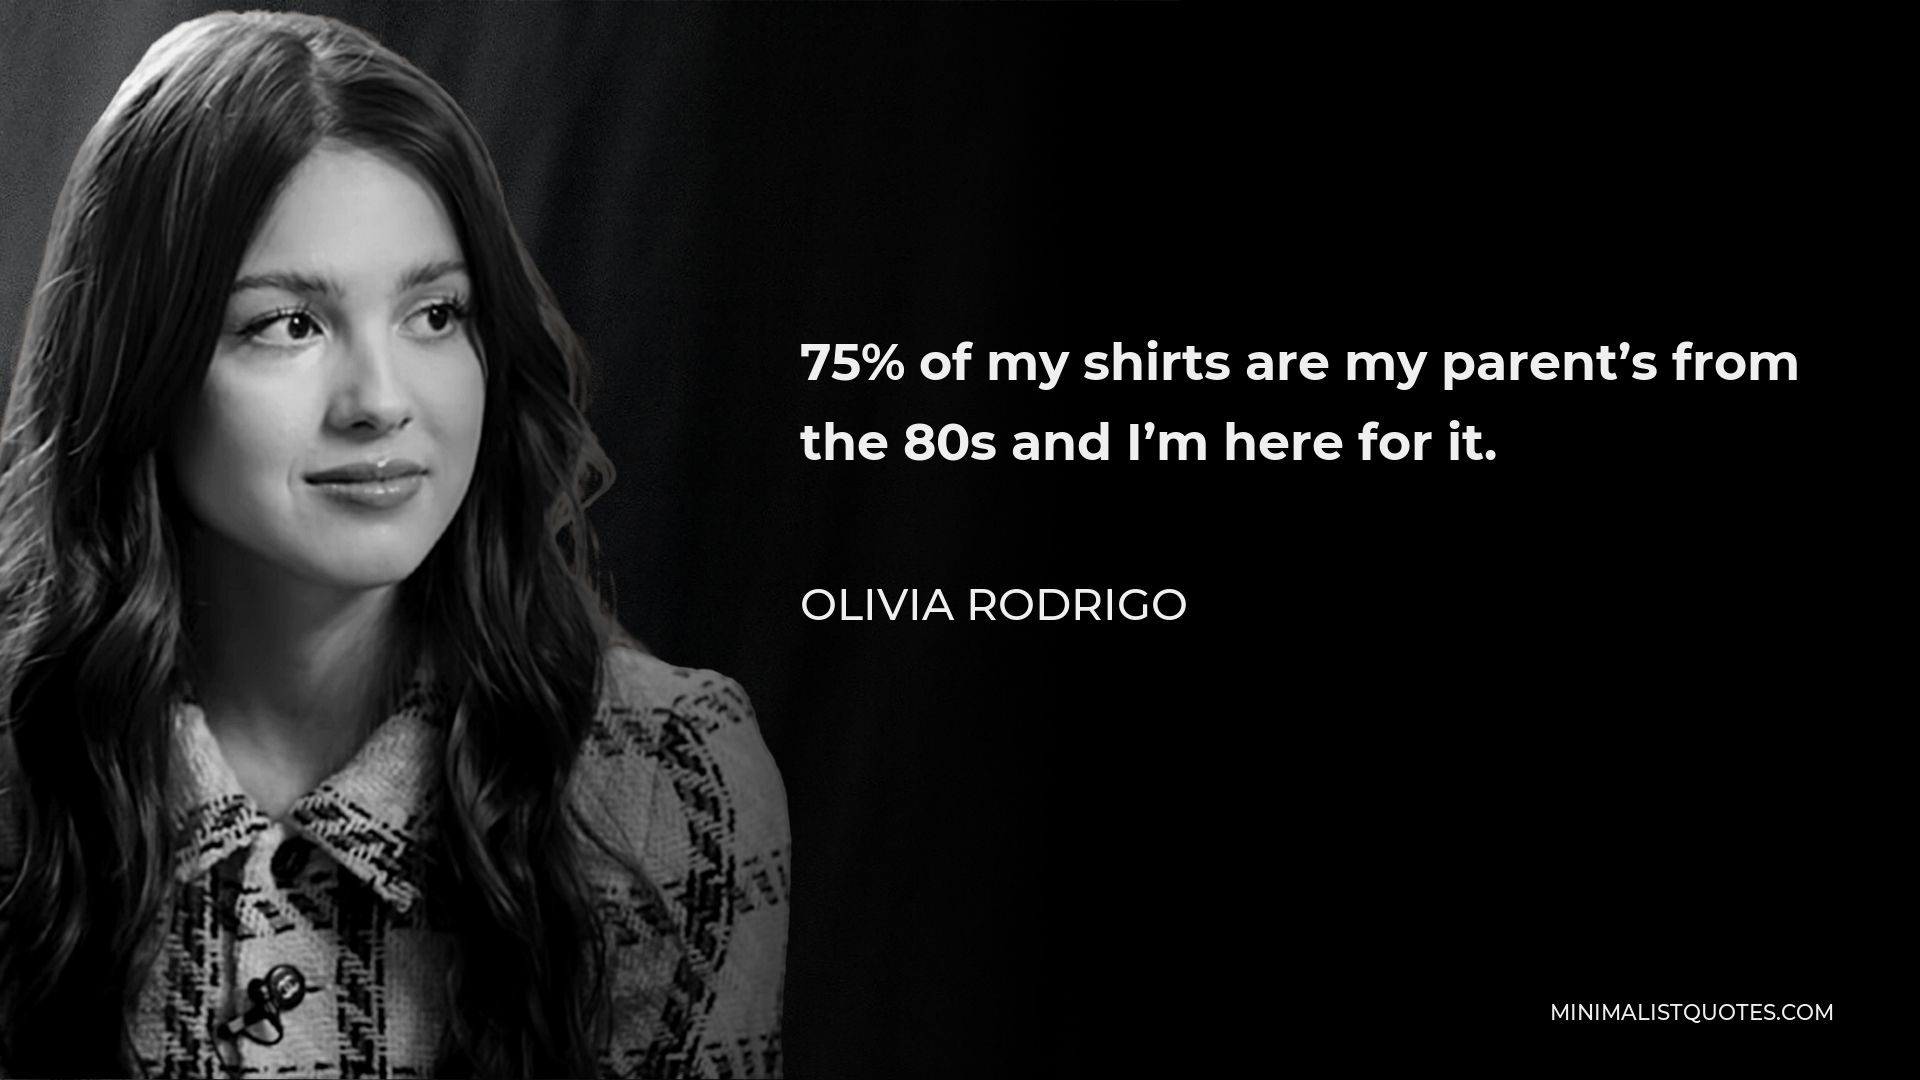 Olivia Rodrigo Quote - 75% of my shirts are my parent’s from the 80s and I’m here for it.